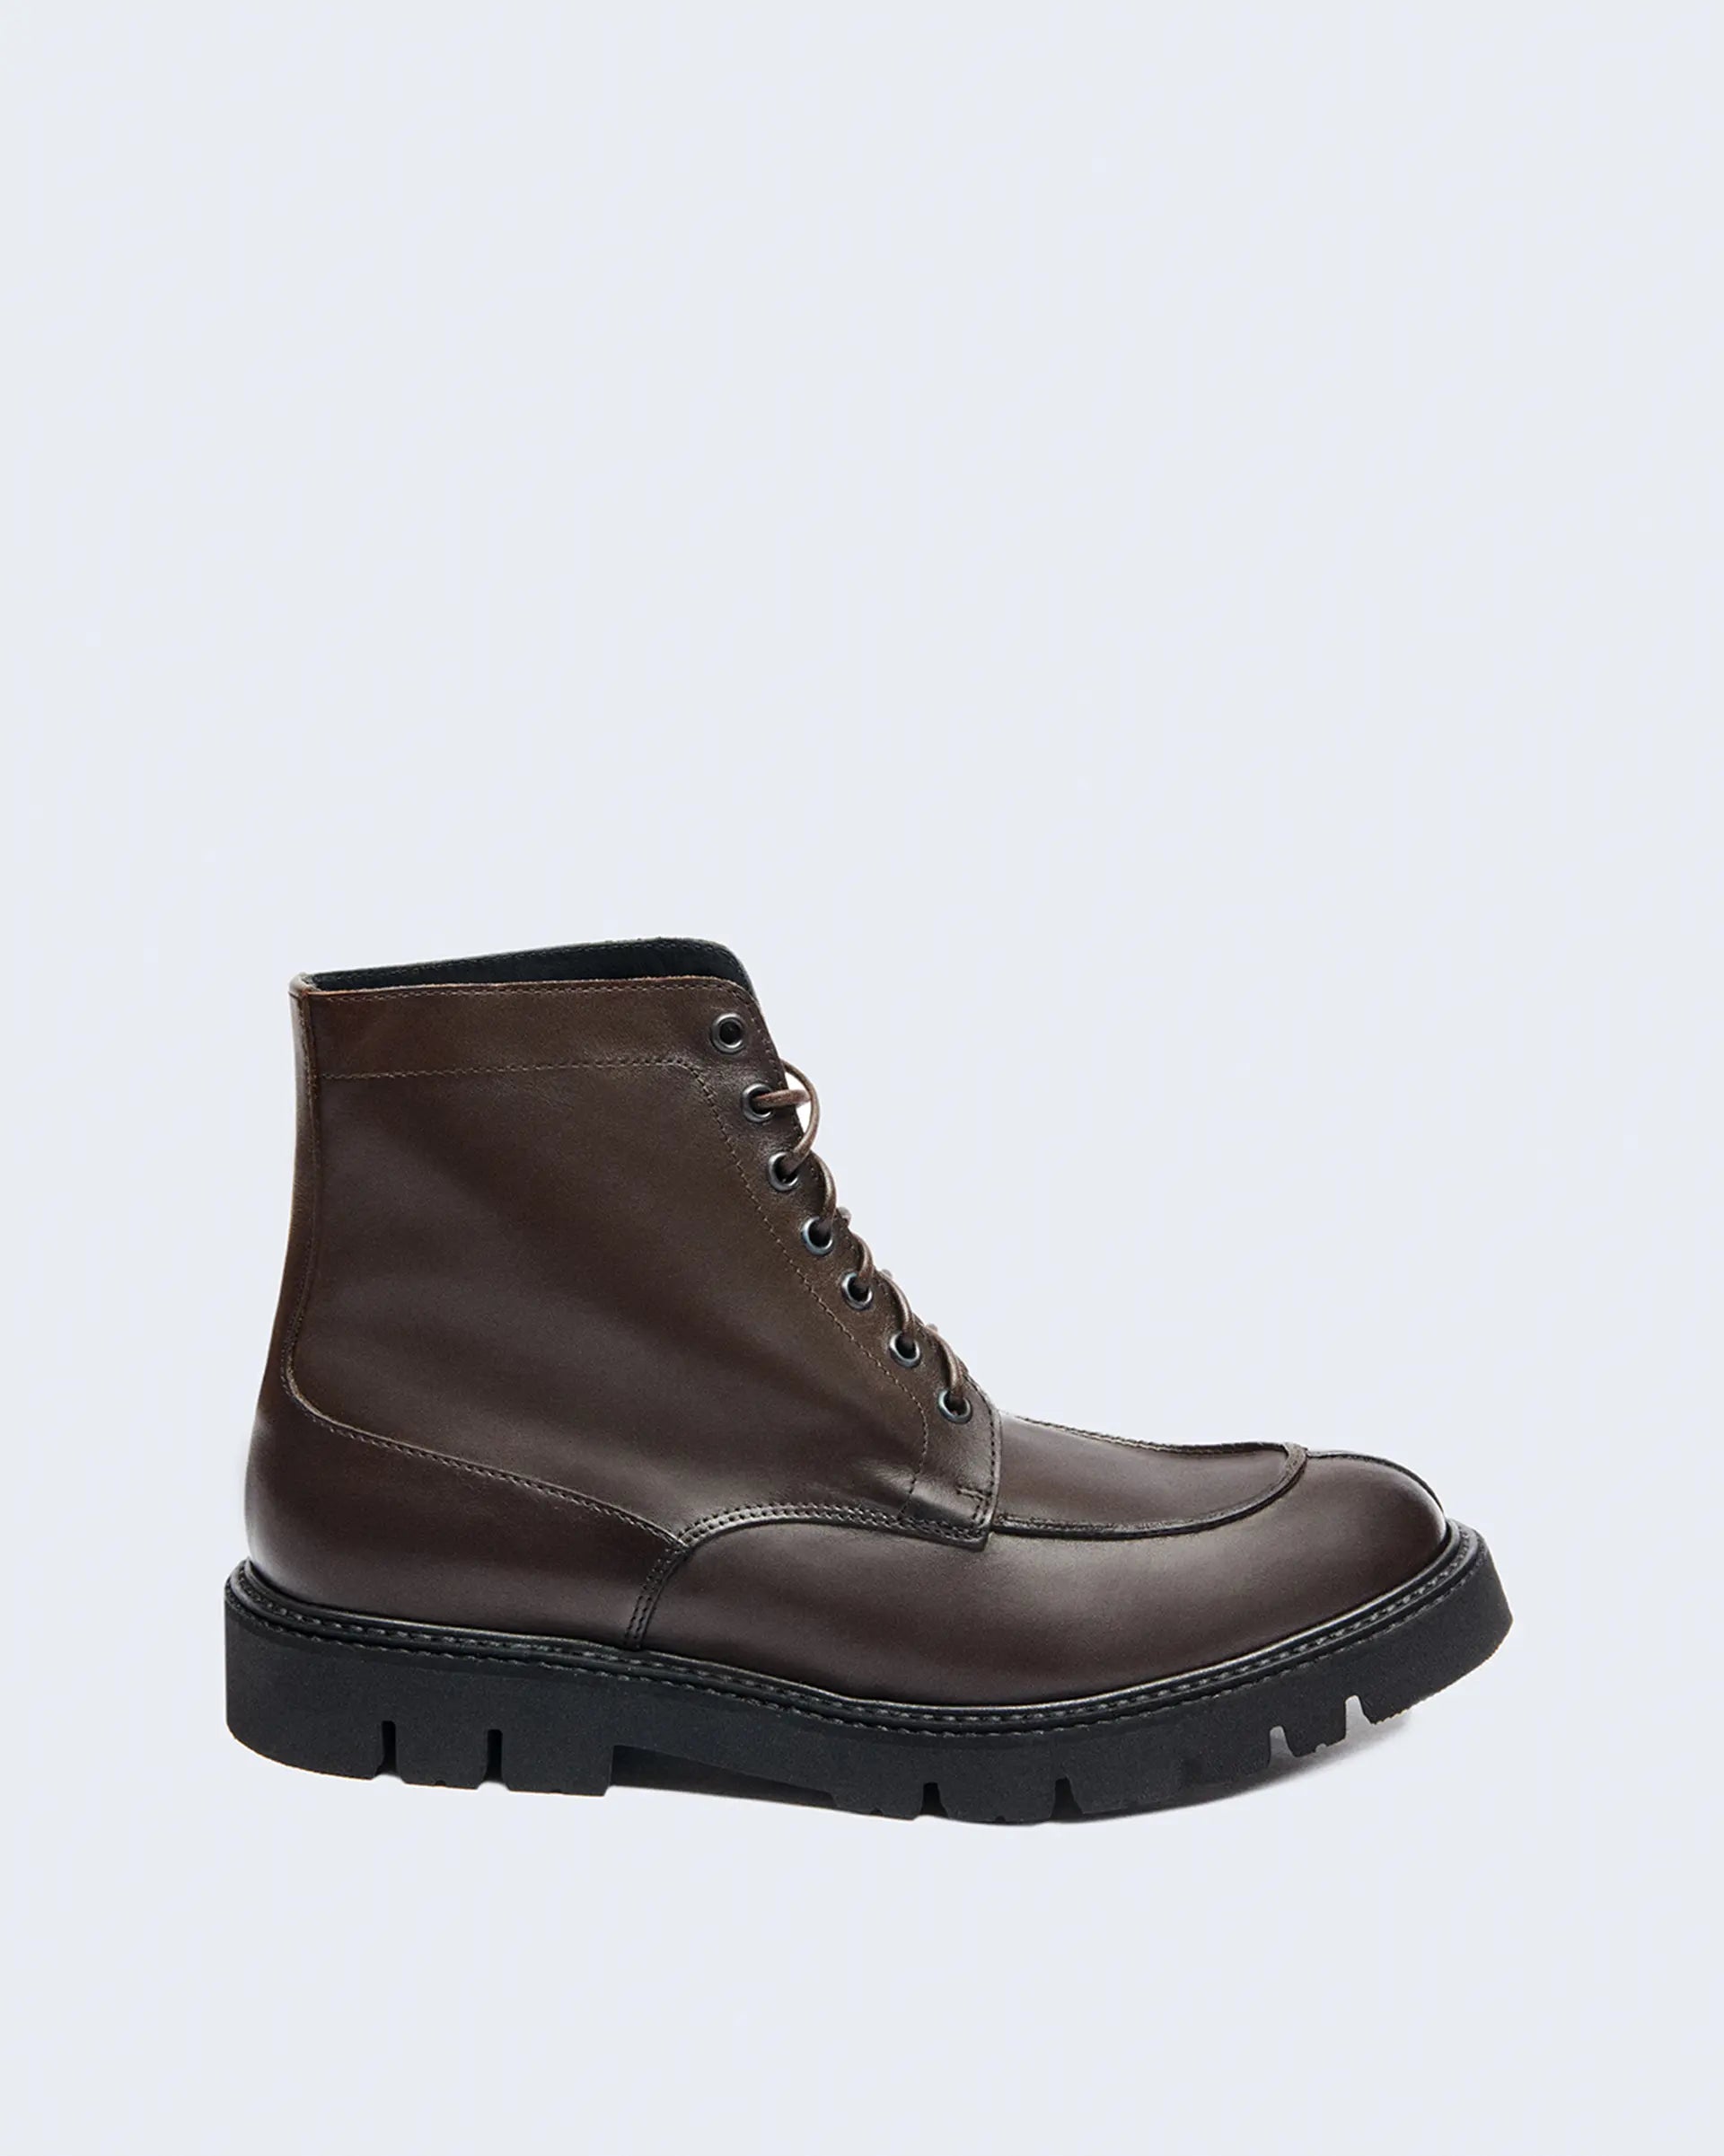 Lace-up boot in dark brown leather